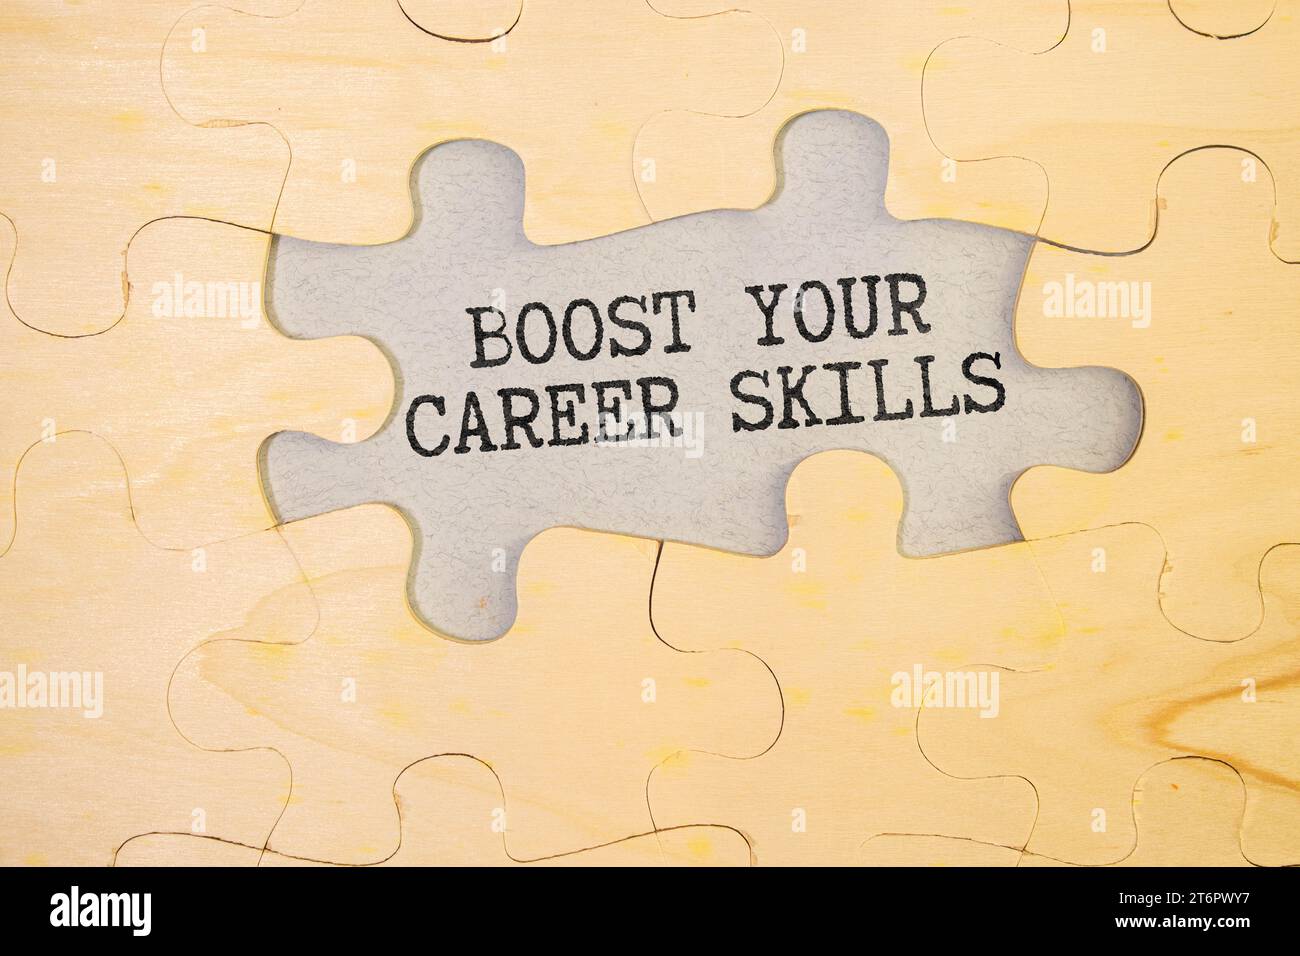 Business concept about Boost Your Career Skills with sign on the piece of paper Stock Photo